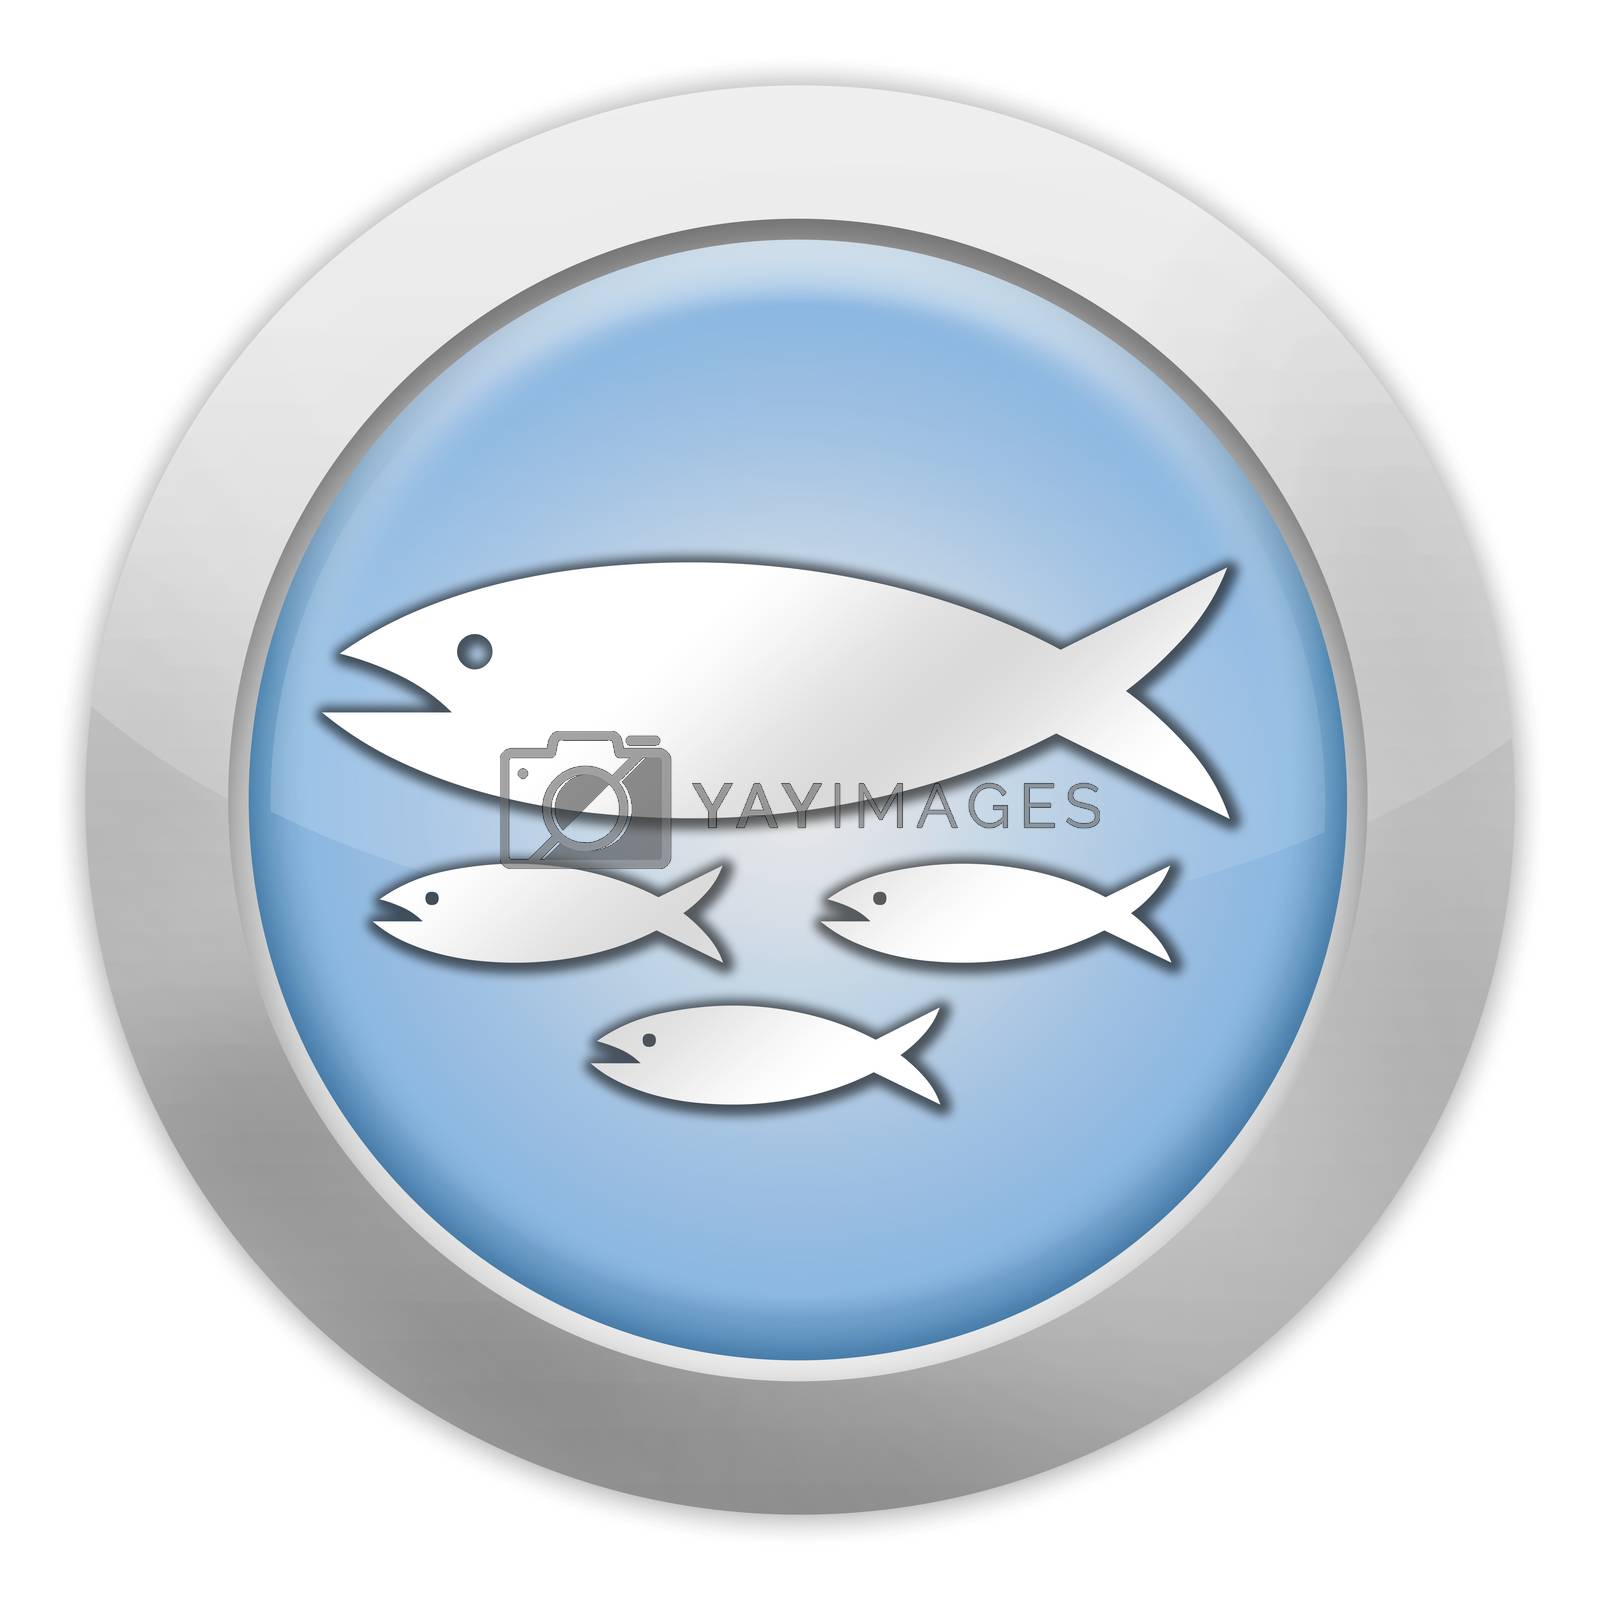 Royalty free image of Icon, Button, Pictogram Fish Hatchery by mindscanner